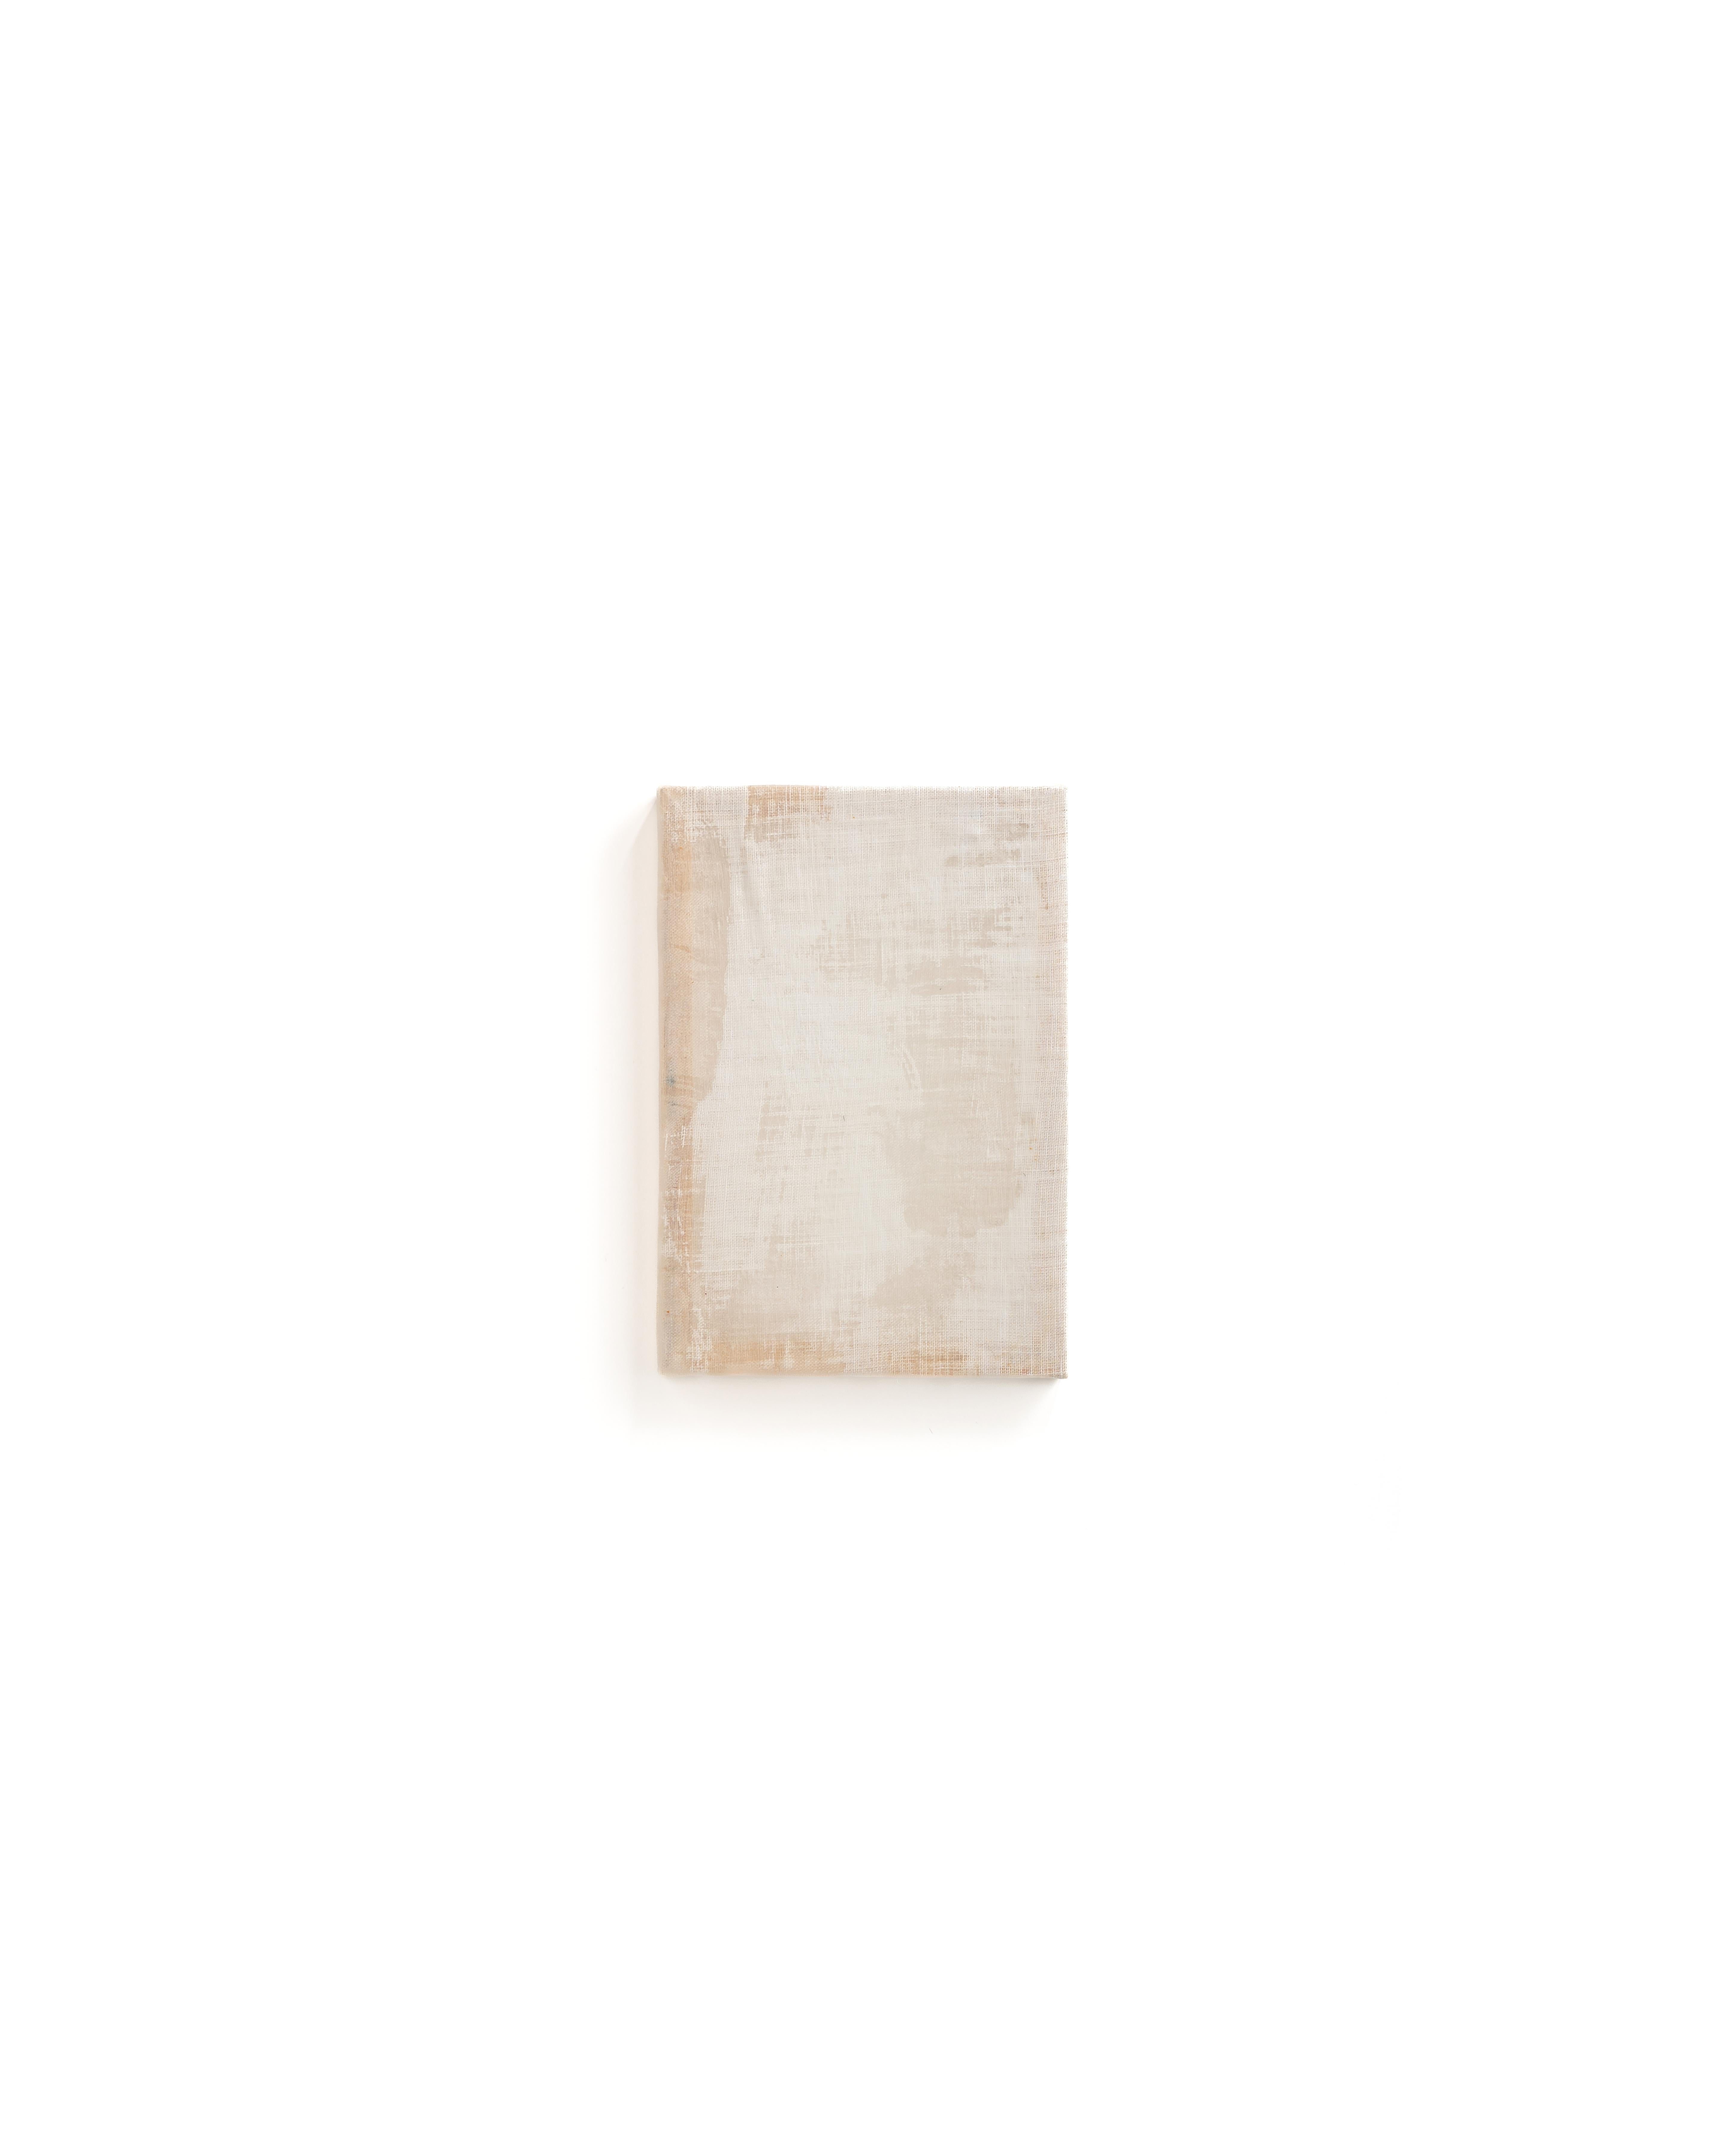 Cristina Loya Domingo Abstract Painting - UNTITLED 0.13 – beeswax on linen, natural materials, ecologies, minimal/abstract